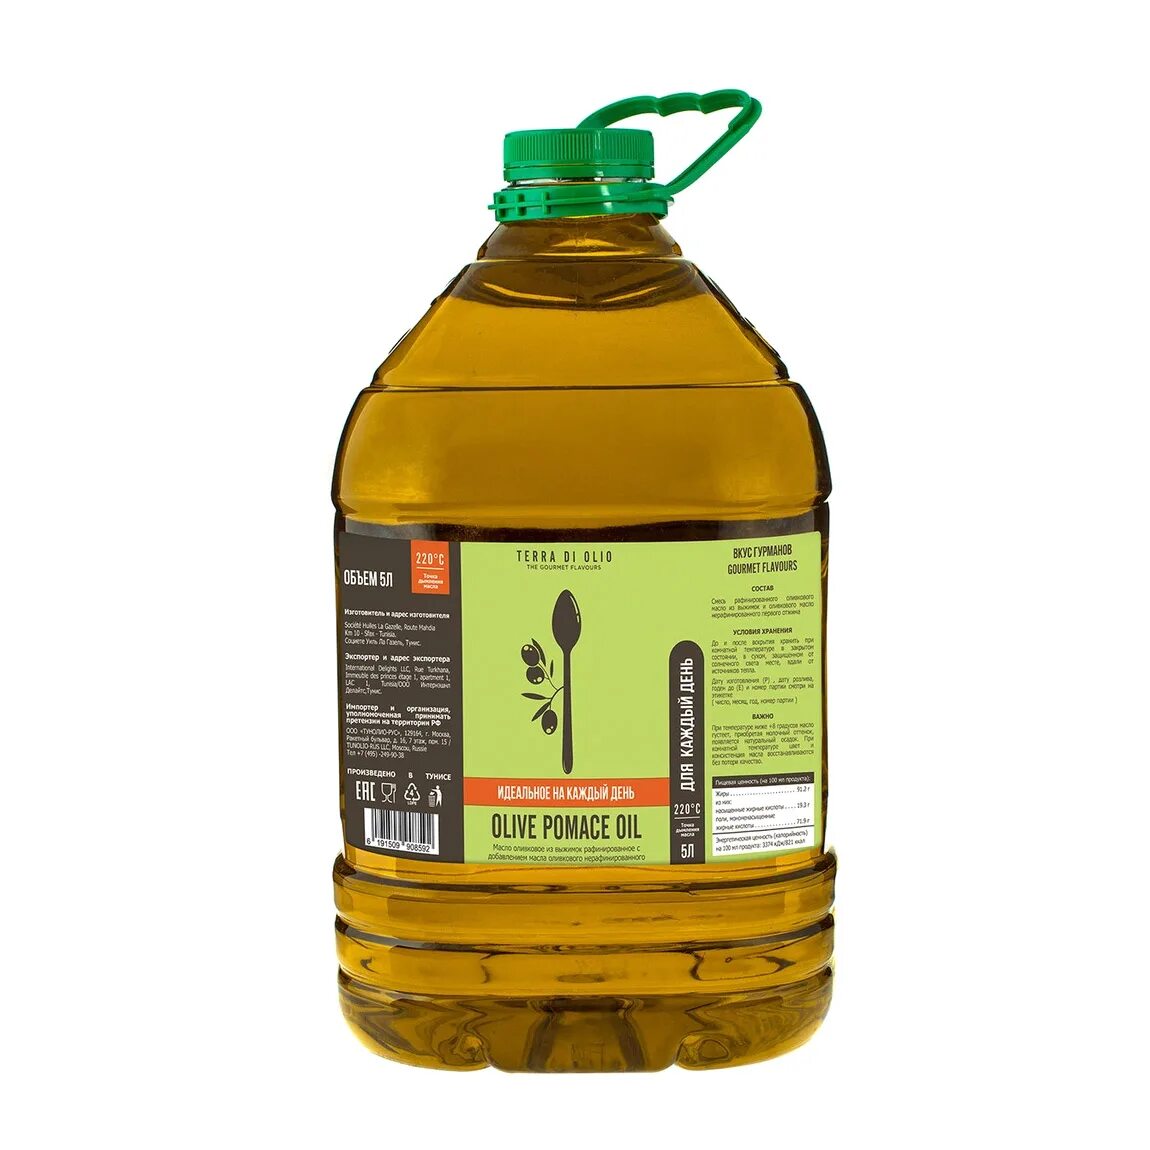 Оливковое 5 л. Оливковое масло Olive Pomace Oil. Масло оливковое Pomace 5 л. Olive Pomace Oil 5 литров. Оливковое масло Pomace Olive Oil, 1 л.